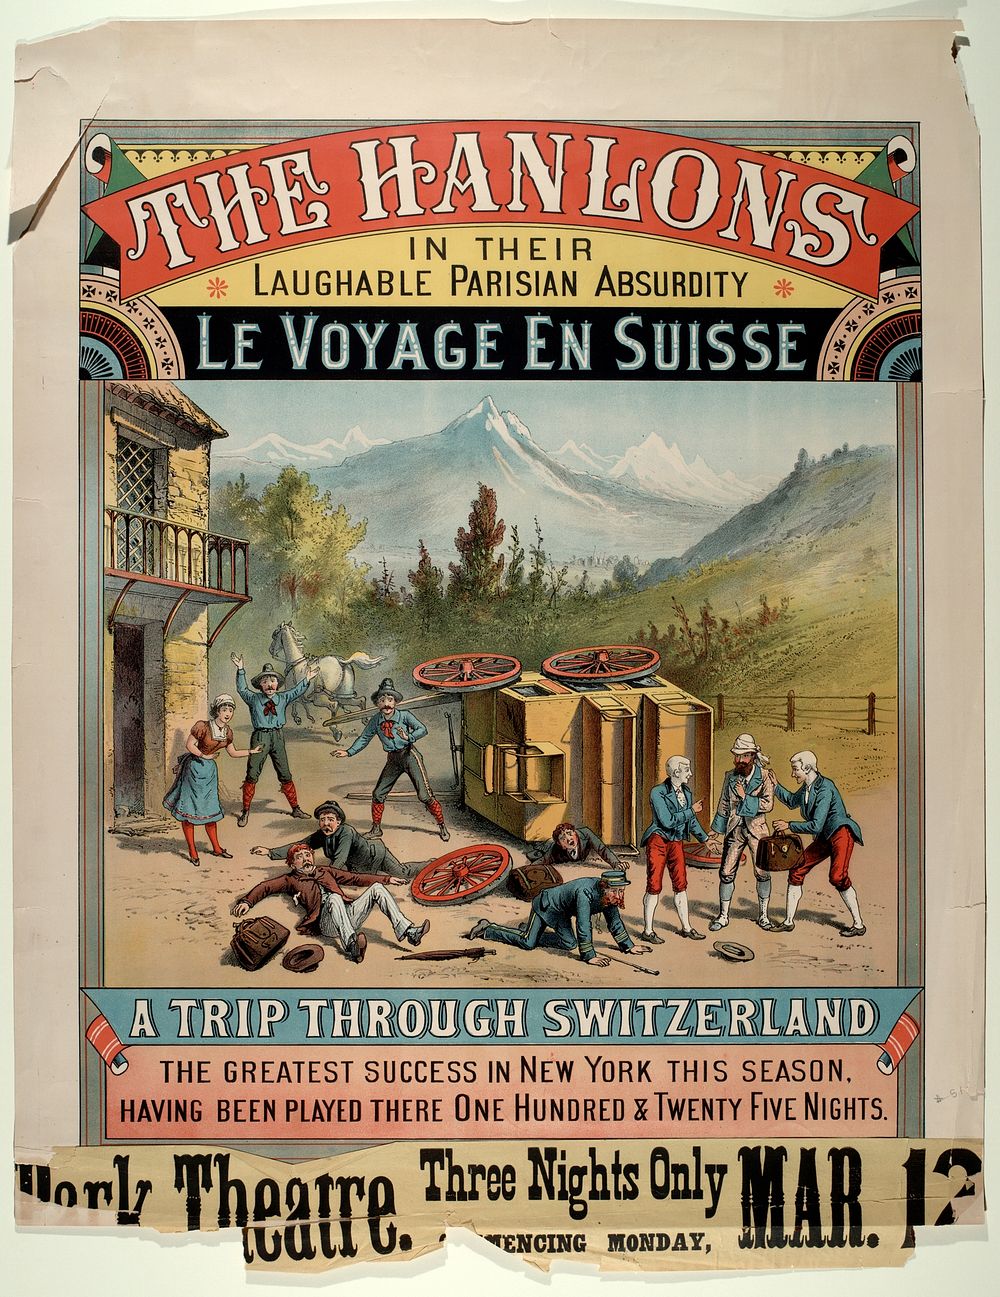 The Hanlons in their Laughable Parisian Absurdity Le Voyage En Suisse publisher by Forbes Lithograph Manufacturing Company…